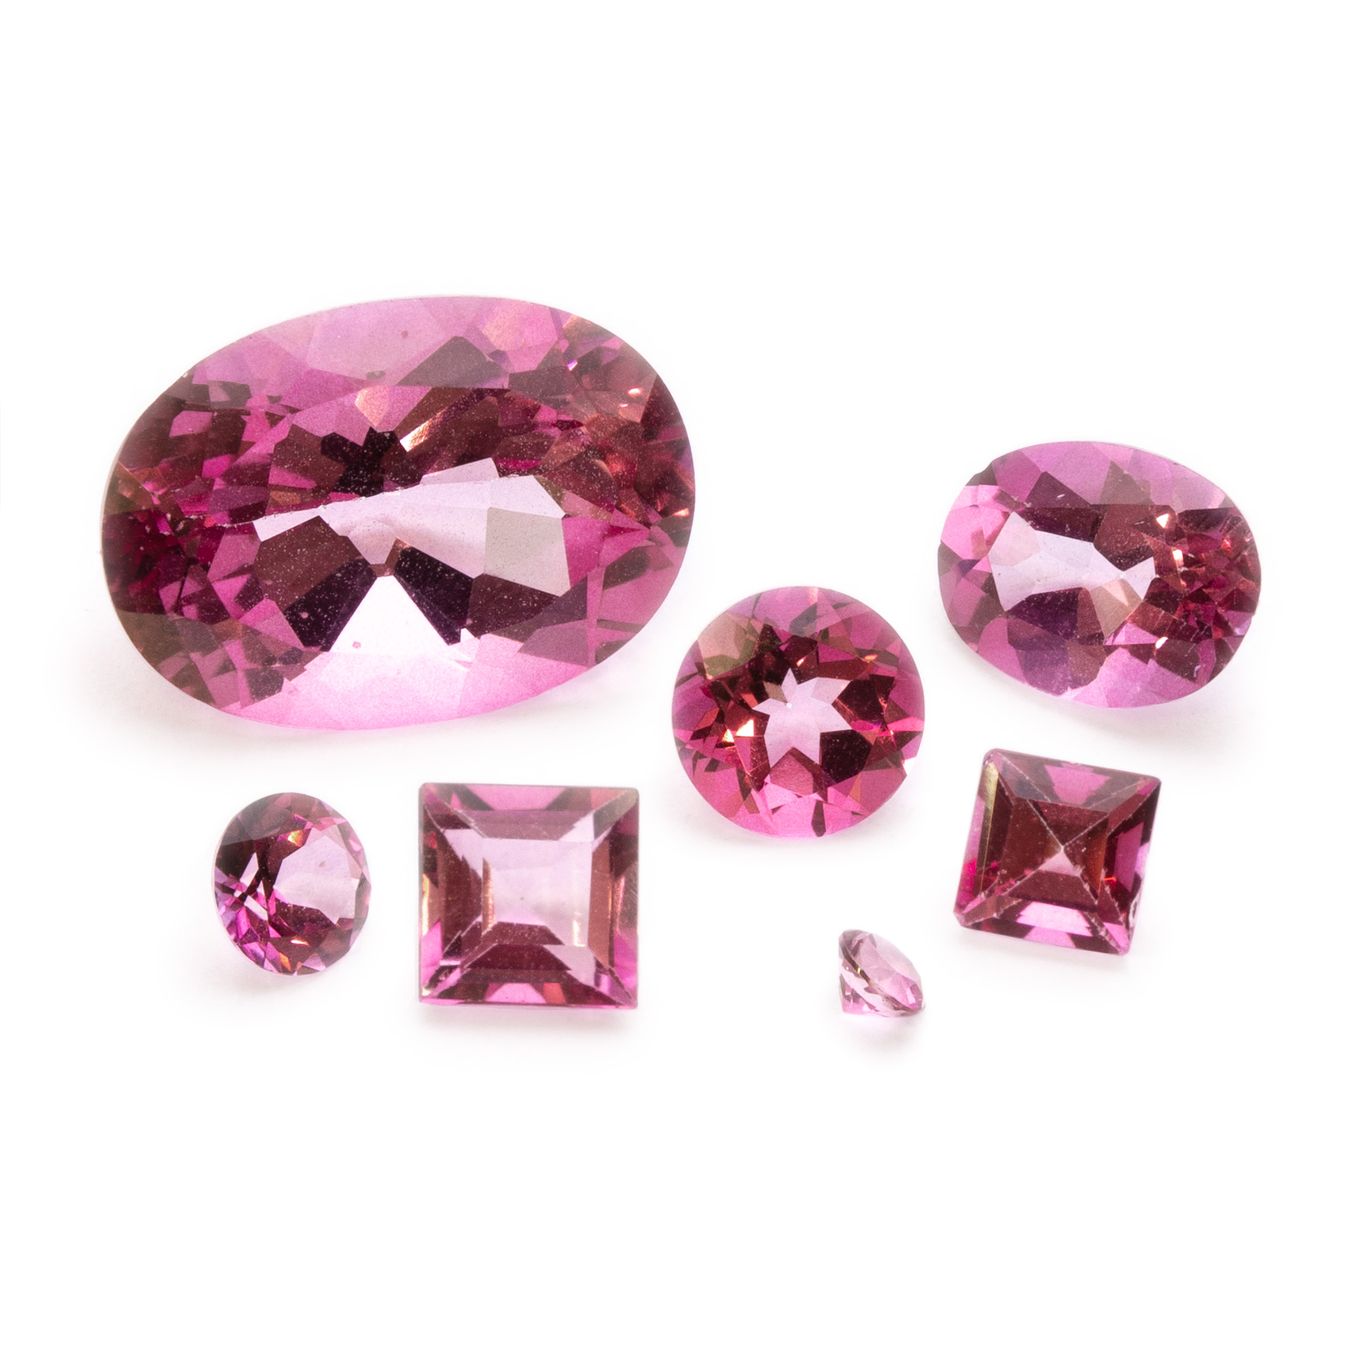 Pink Topaz Faceted Stones